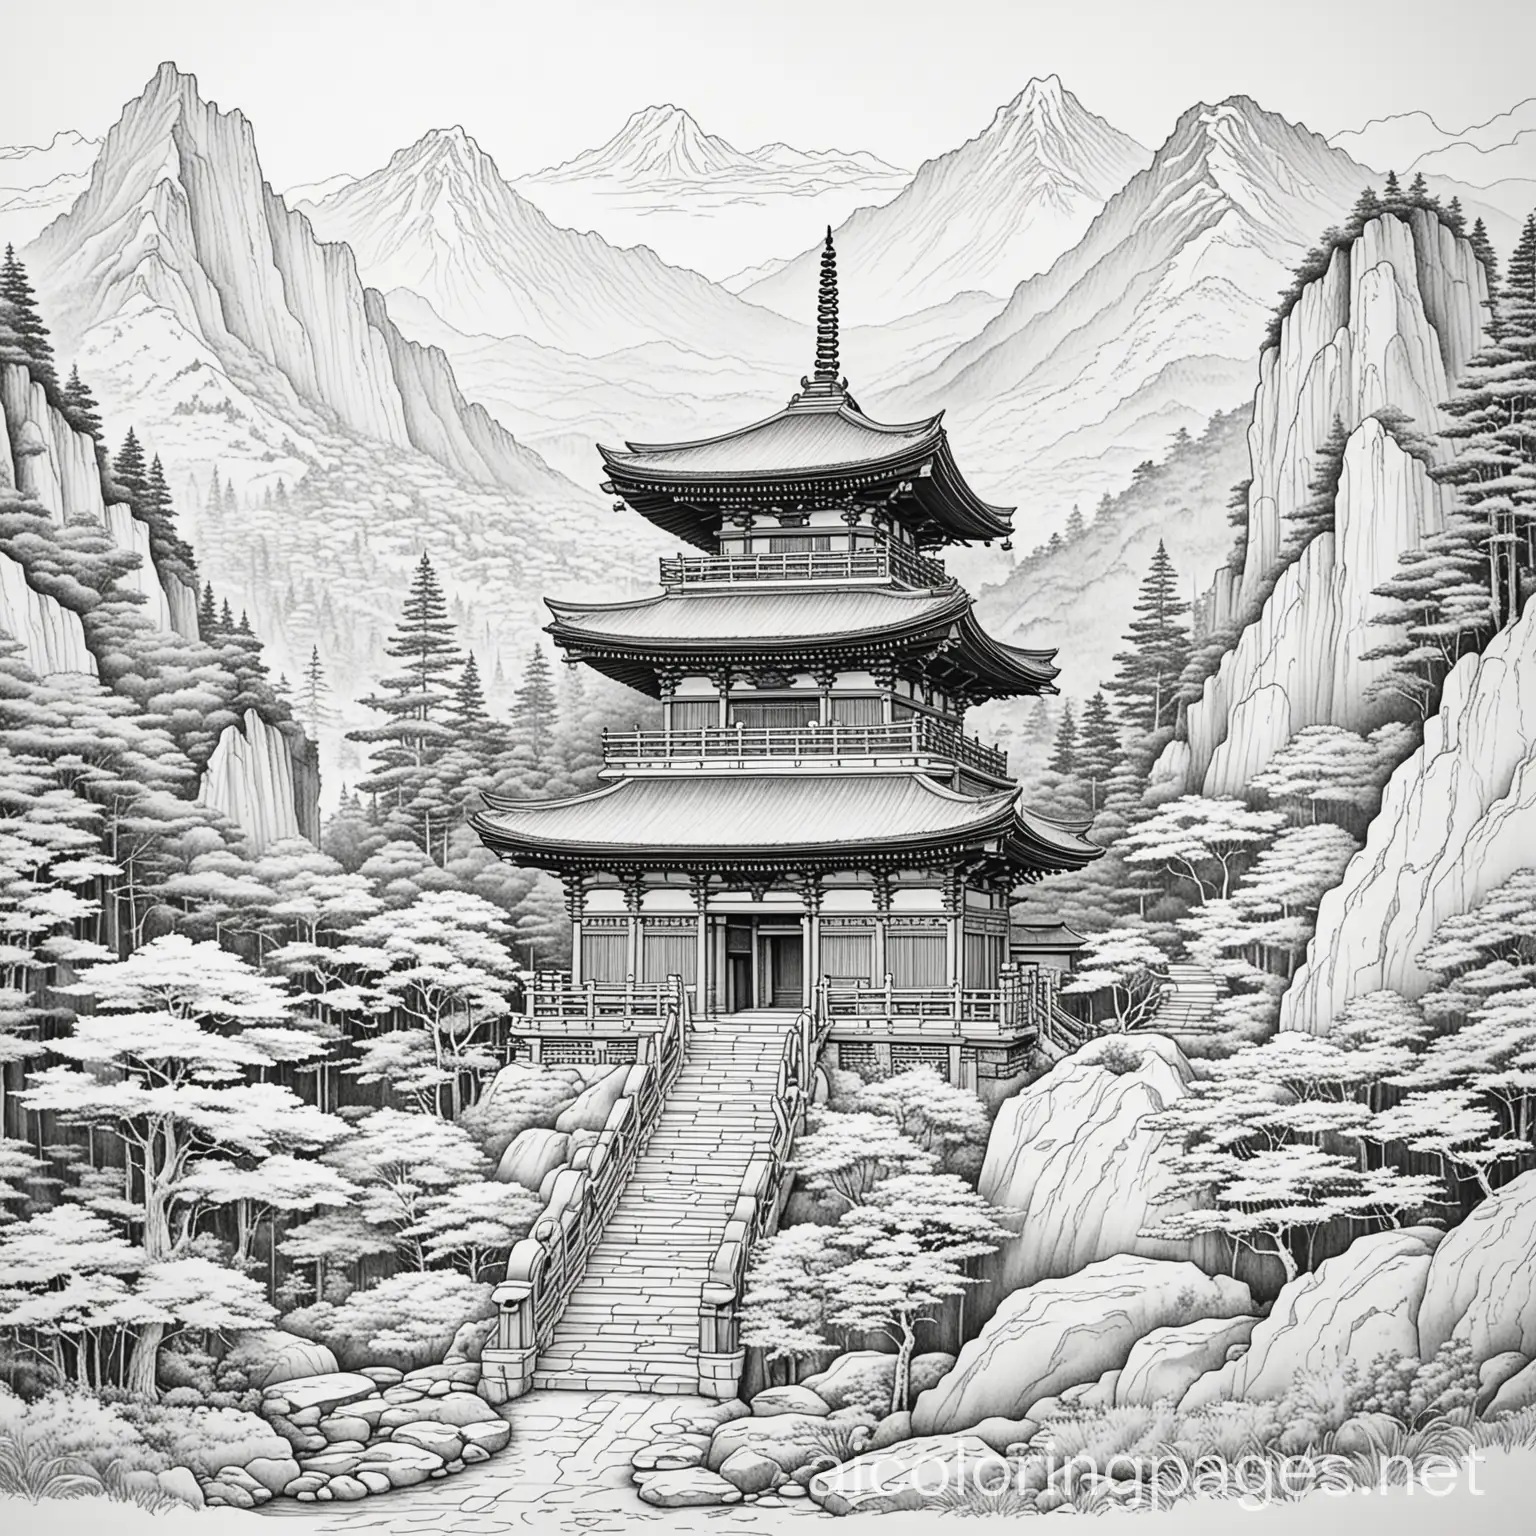 a black and white line drawing of a japanese temple in the mountains, coloring page, ample white space, bold lines easy for kids to color inside the lines, Coloring Page, black and white, line art, white background, Simplicity, Ample White Space. The background of the coloring page is plain white to make it easy for young children to color within the lines. The outlines of all the subjects are easy to distinguish, making it simple for kids to color without too much difficulty